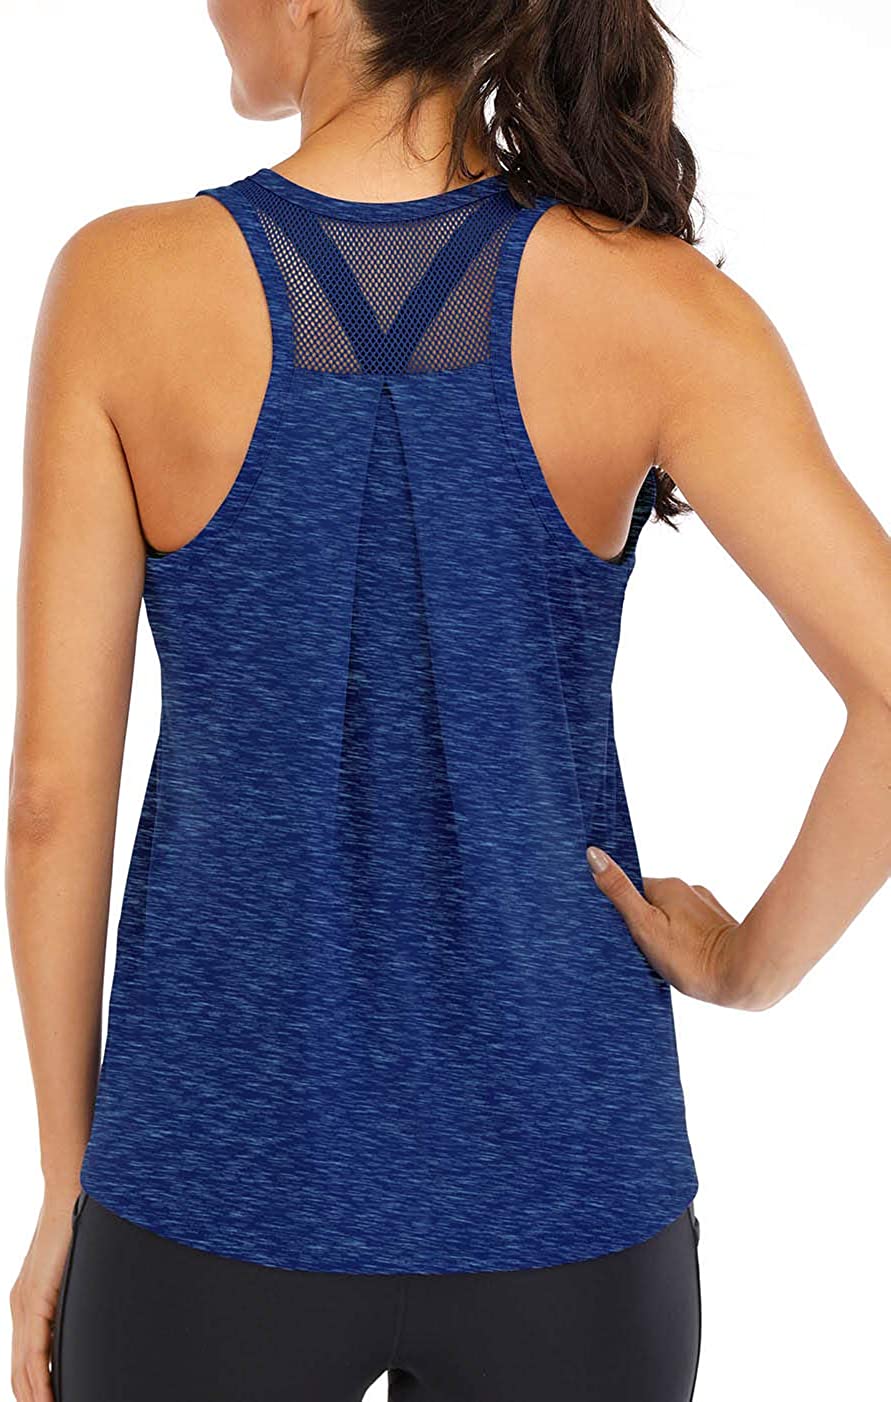 ICTIVE Workout Tops for Women Loose fit Racerback Tank Tops for